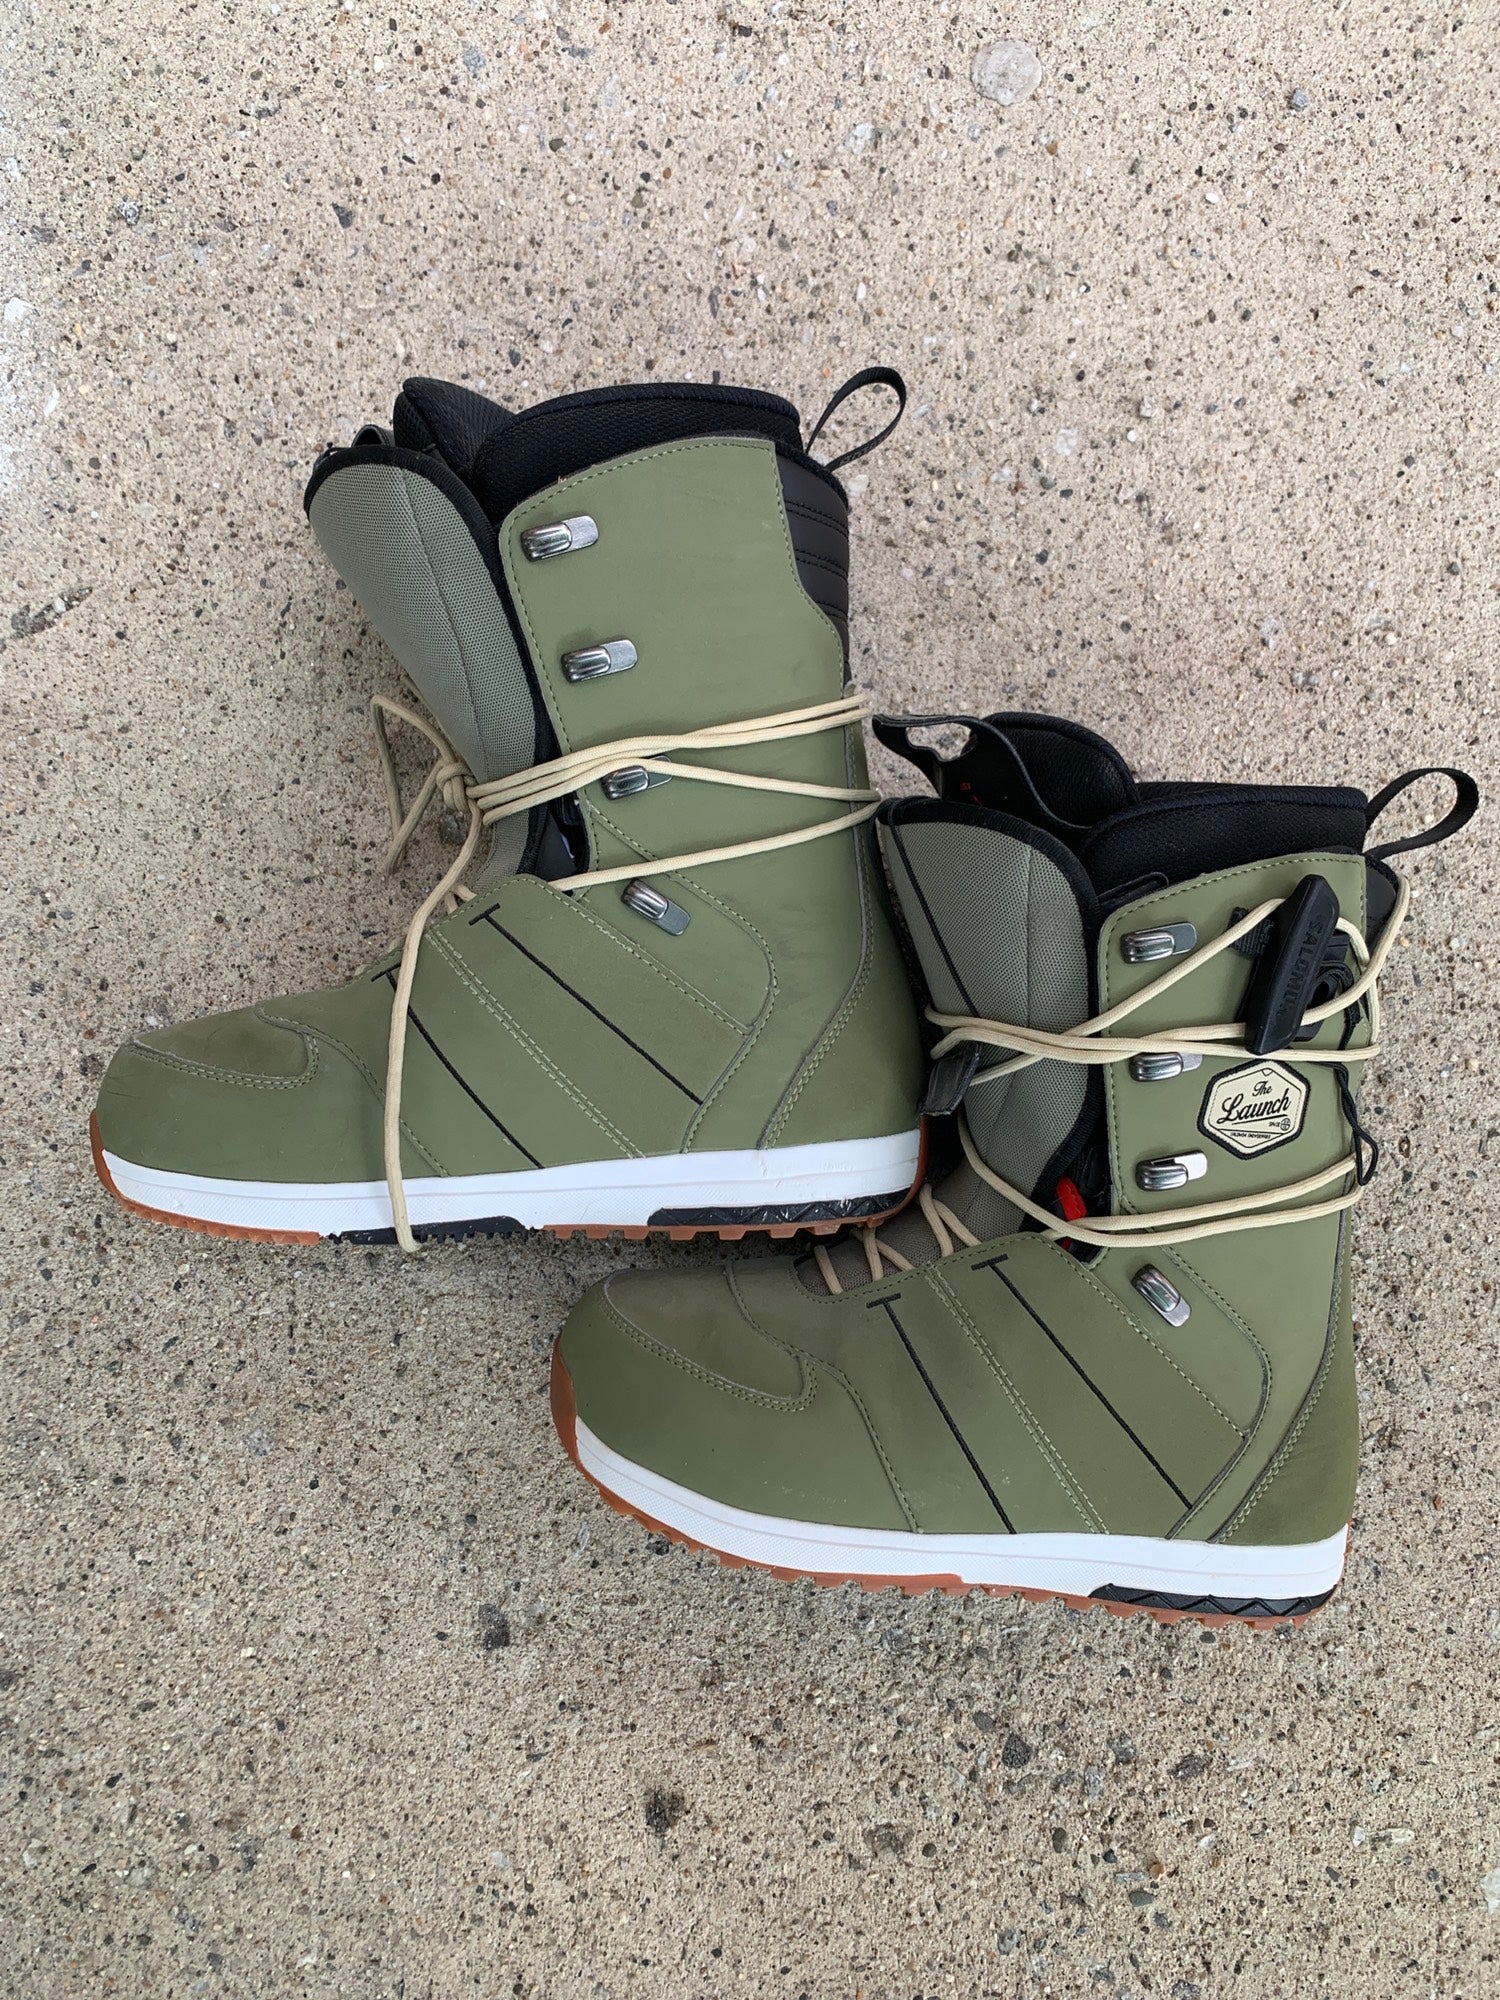 plak analyse academisch Used Salomon Launch Lace Snowboard Boots - Size: M 9.0 (W 10.0) |  SidelineSwap